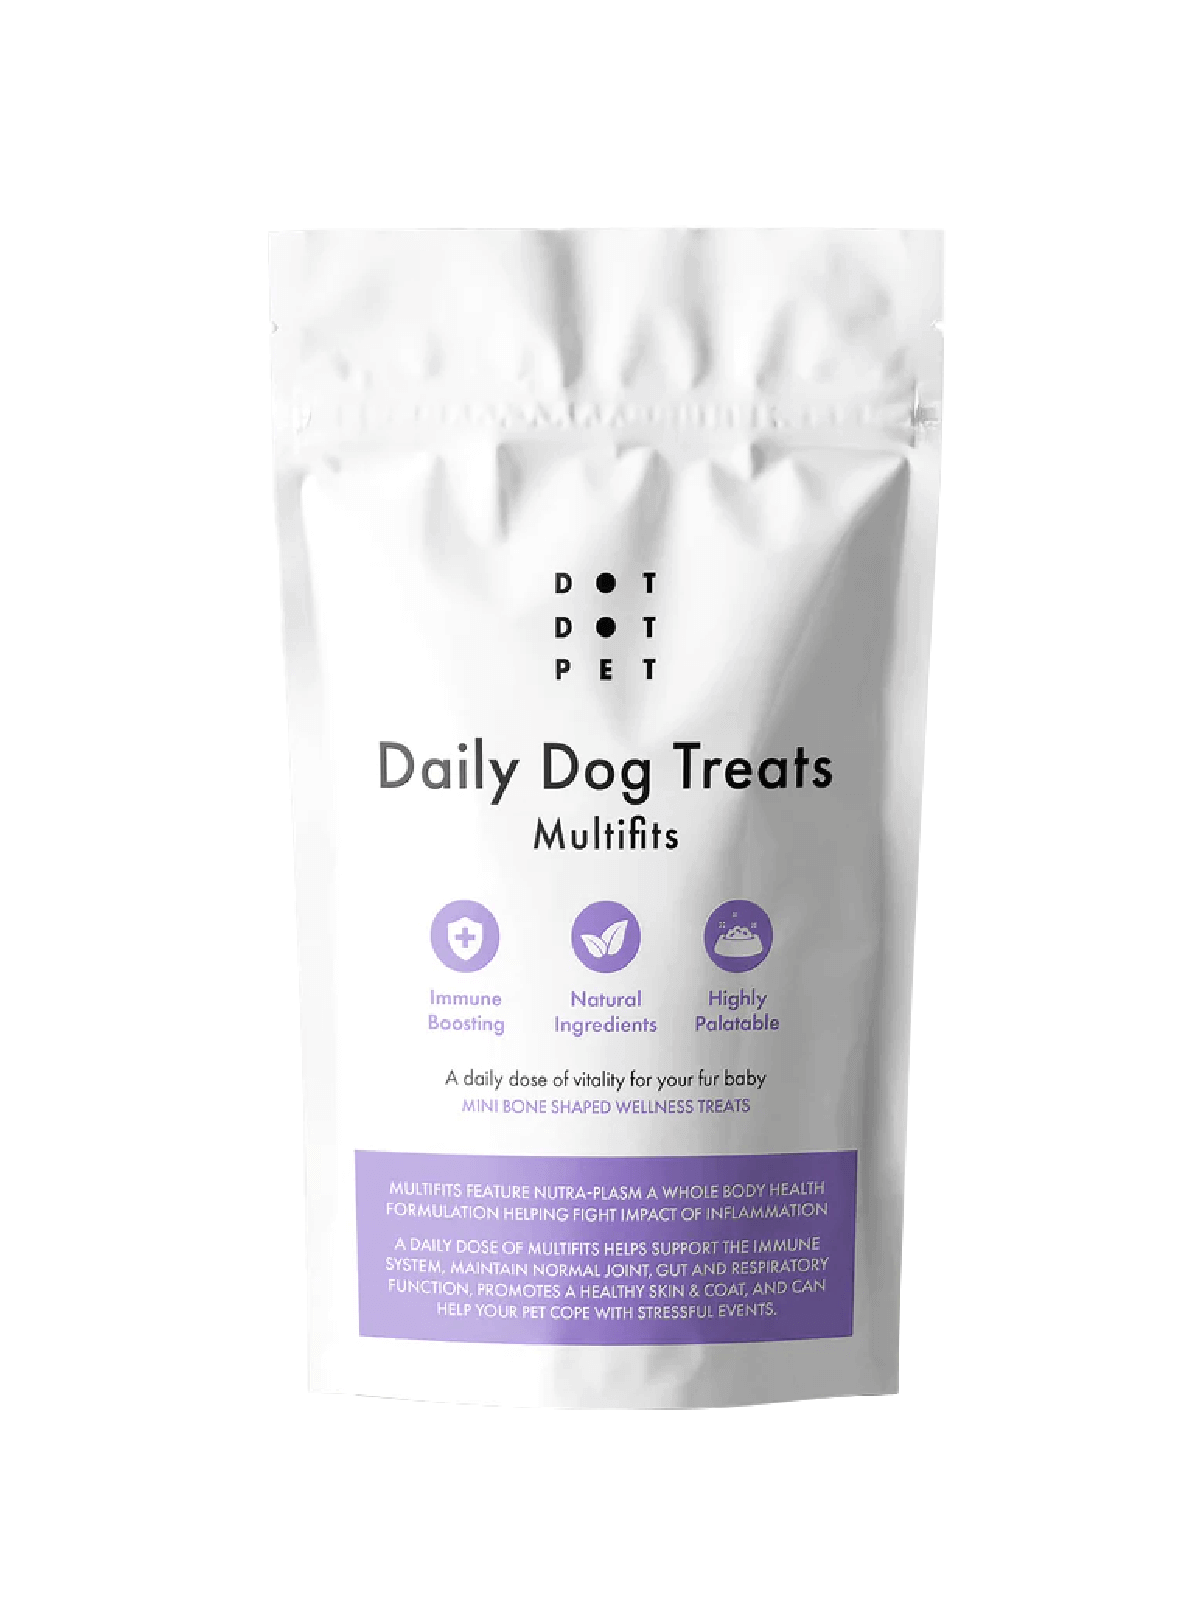 Multifit Dog Supplements immune boosting dog supplements whole body health good for skin and coat, gut health and mobility, natural high protein ingredients, full of essential vitamins for your dog